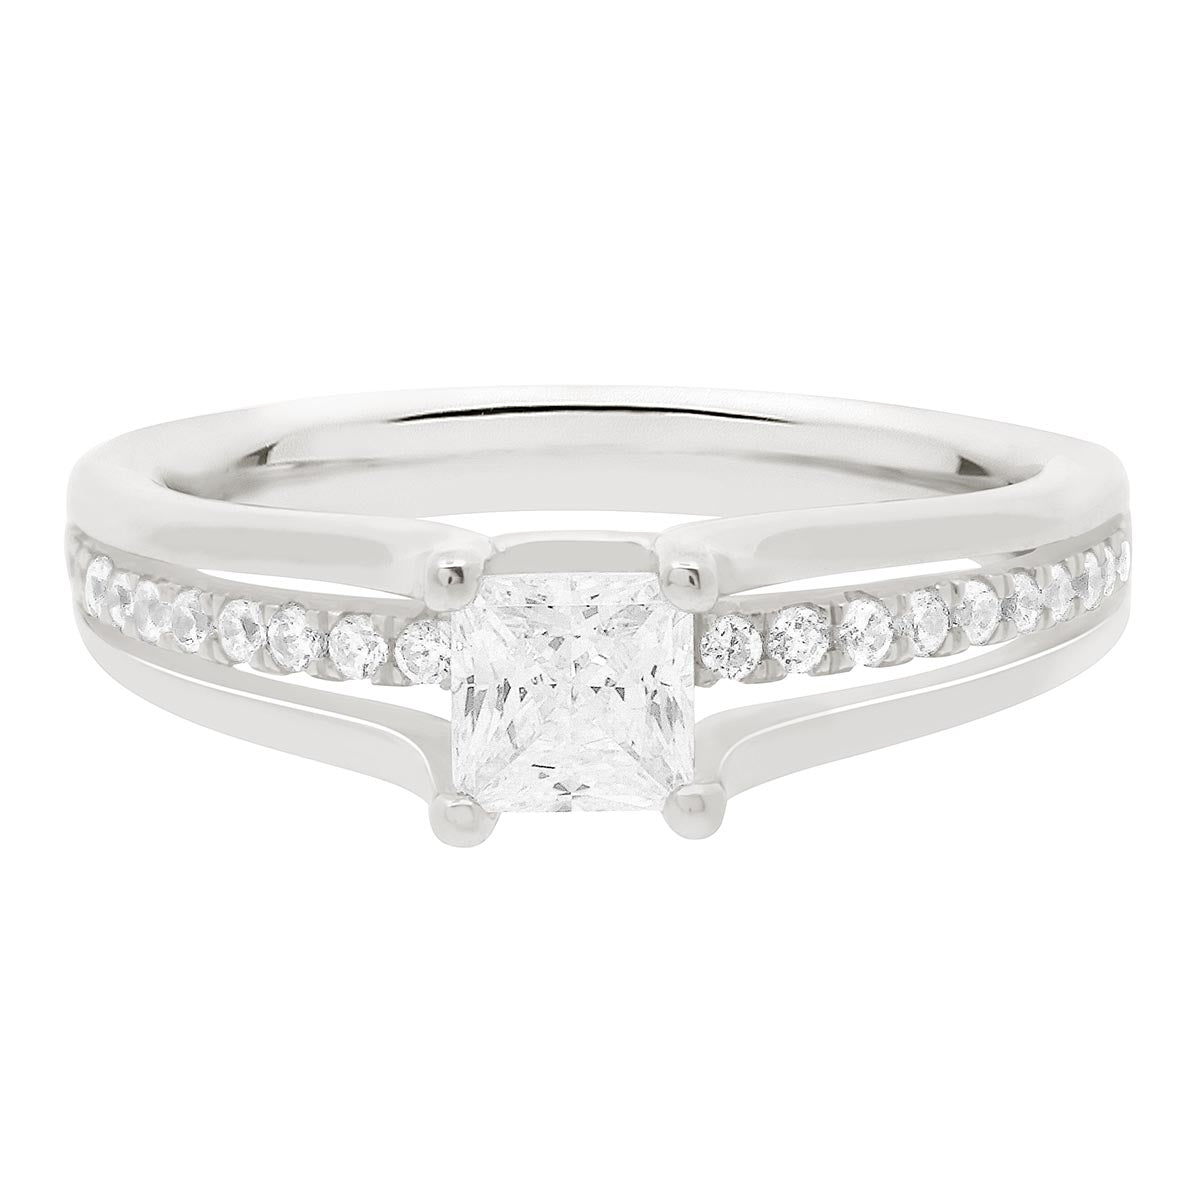 Princess Cut Diamond Engagement Ring made from white gold